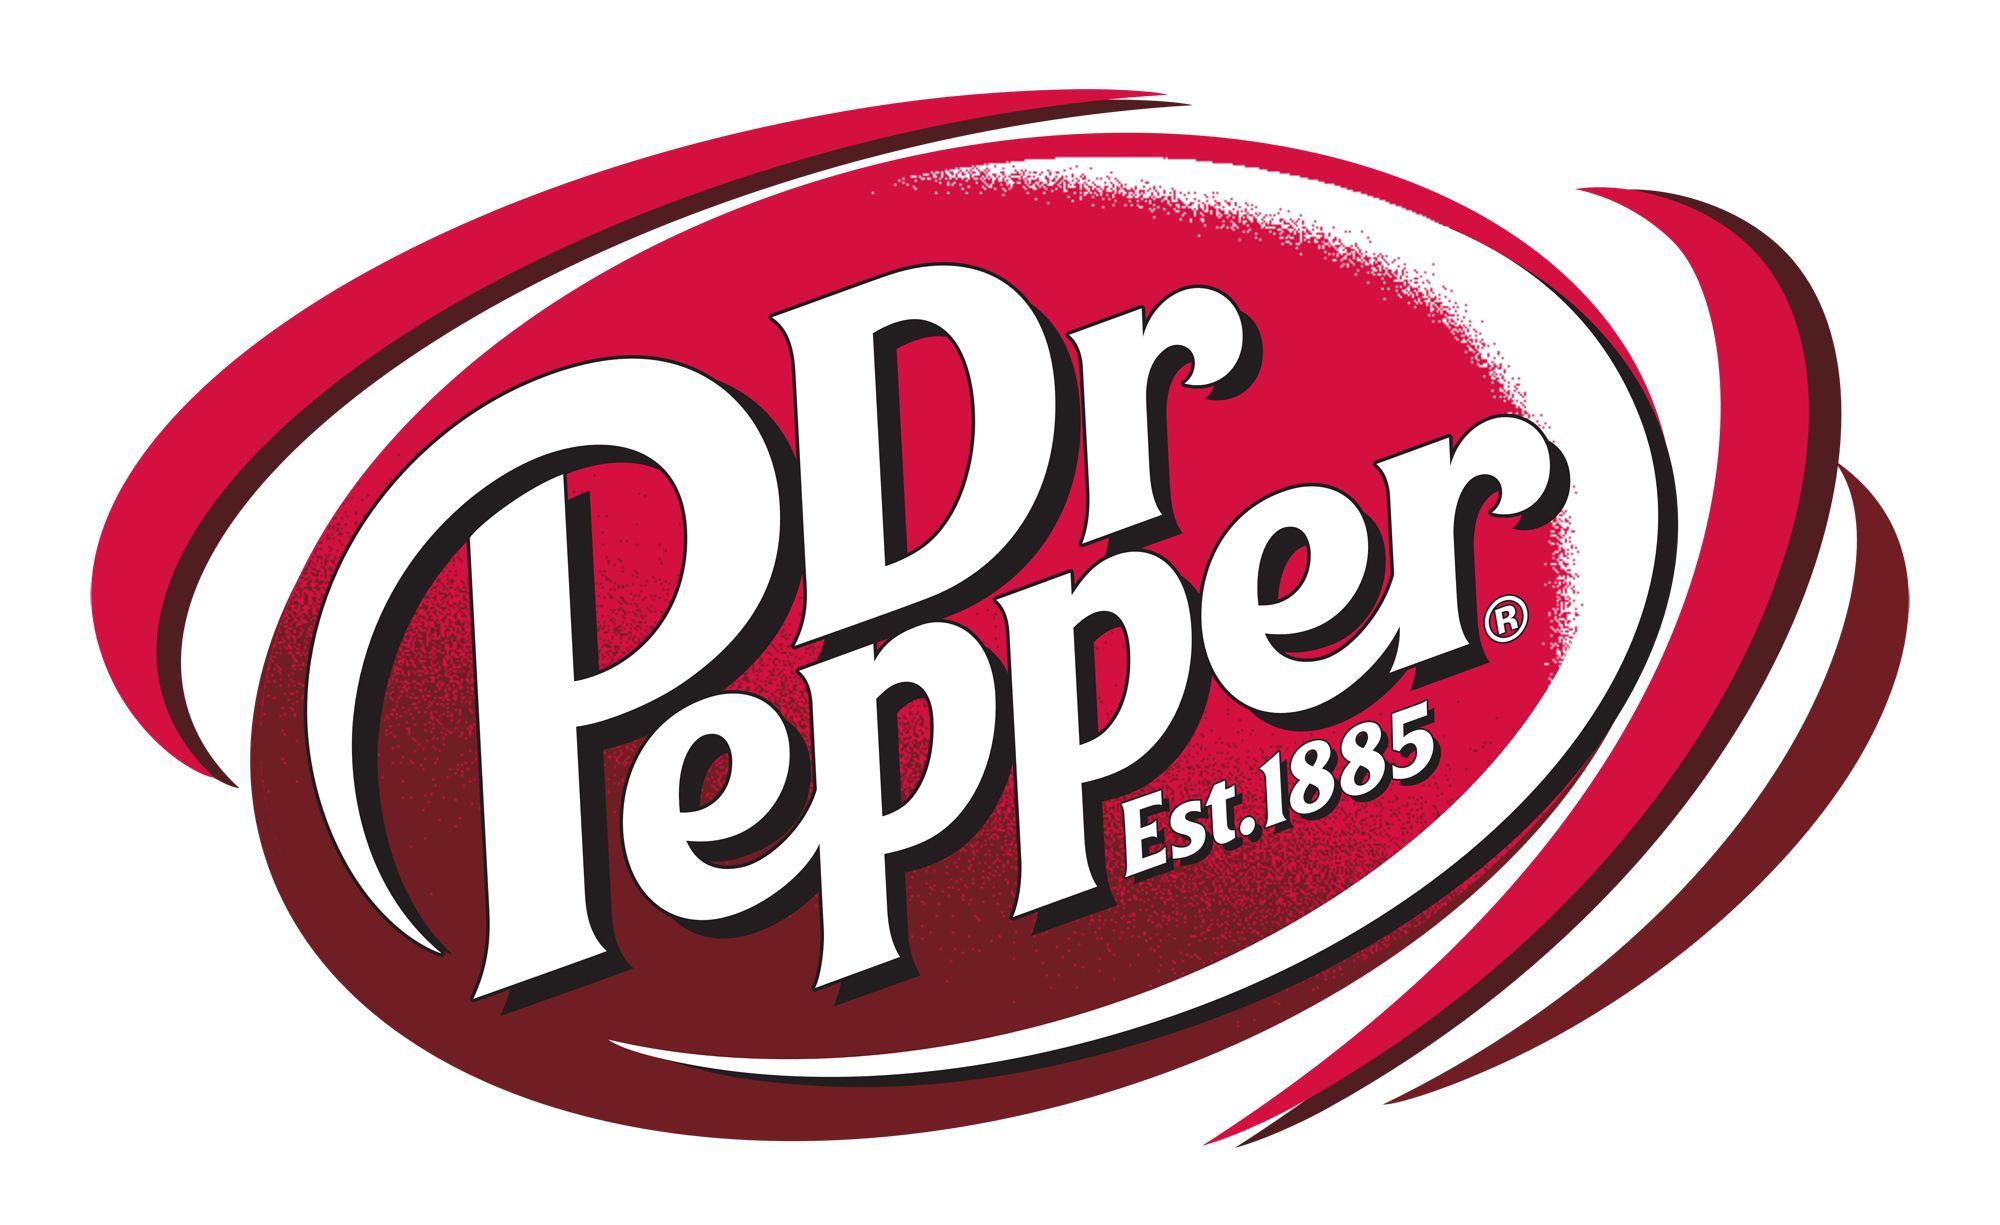 Pepper Logo - Meaning Dr Pepper logo and symbol | history and evolution